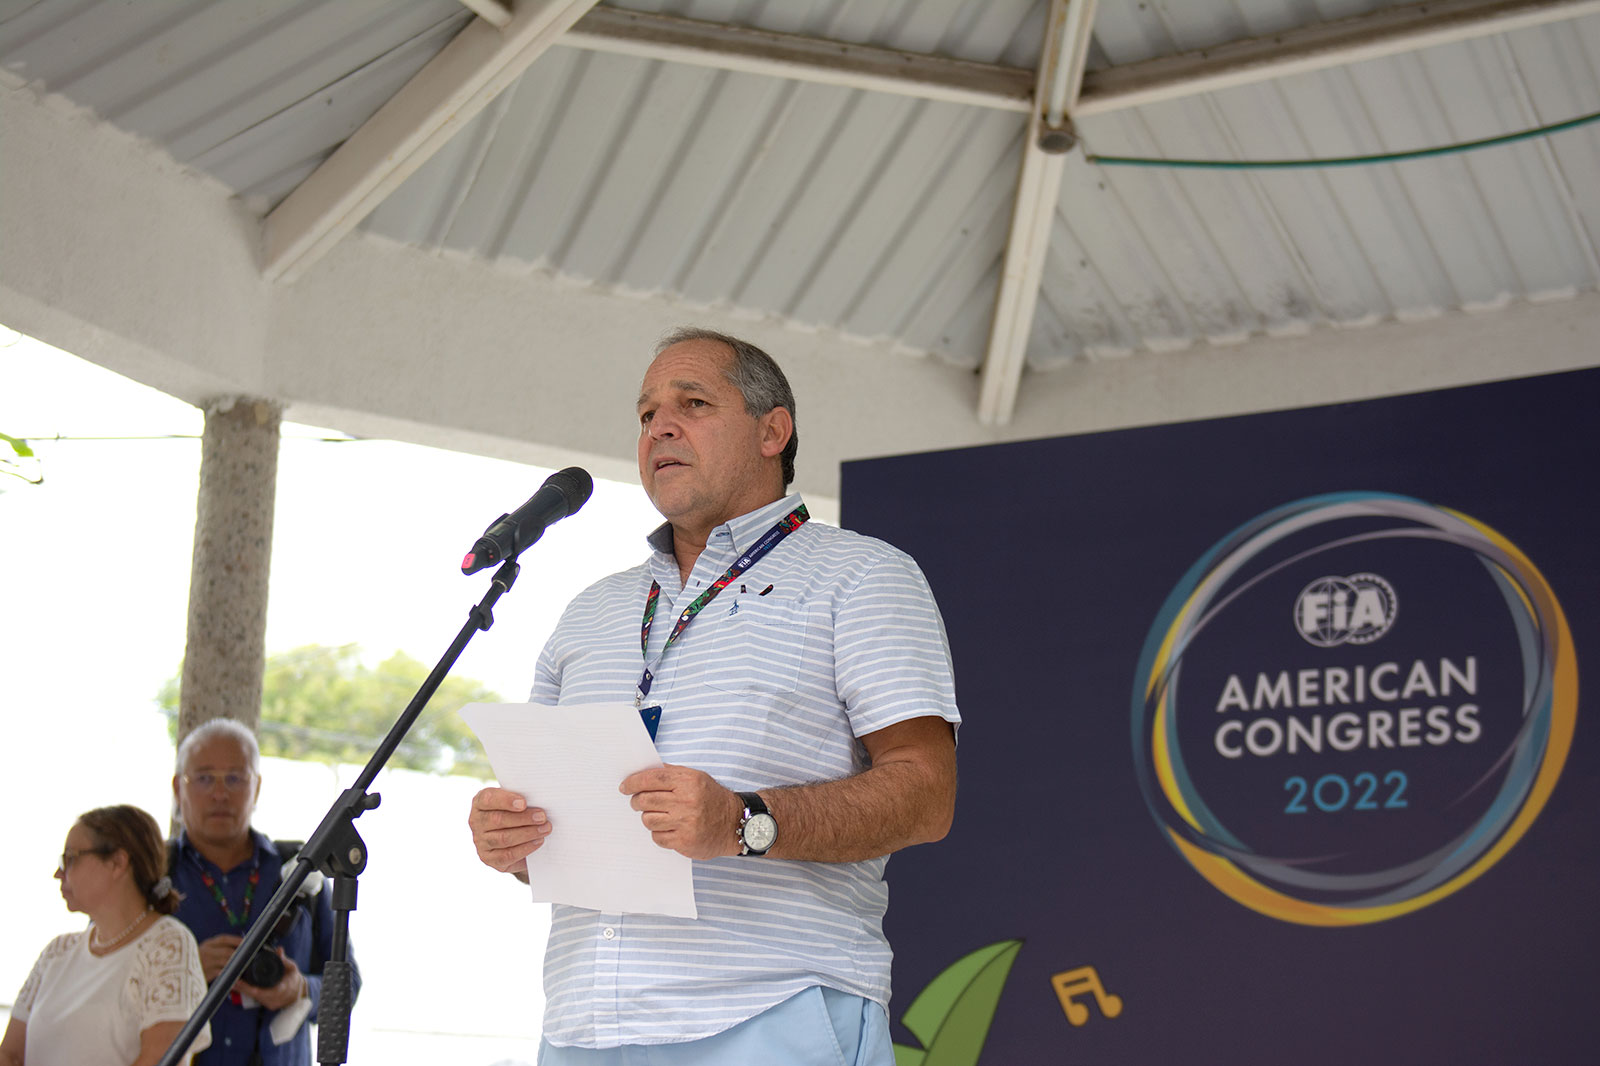 Ricardo Morales Rubio, President of the Touring y Automóvil Club de Colombia and FIA Region IV (South America and Central America) President.